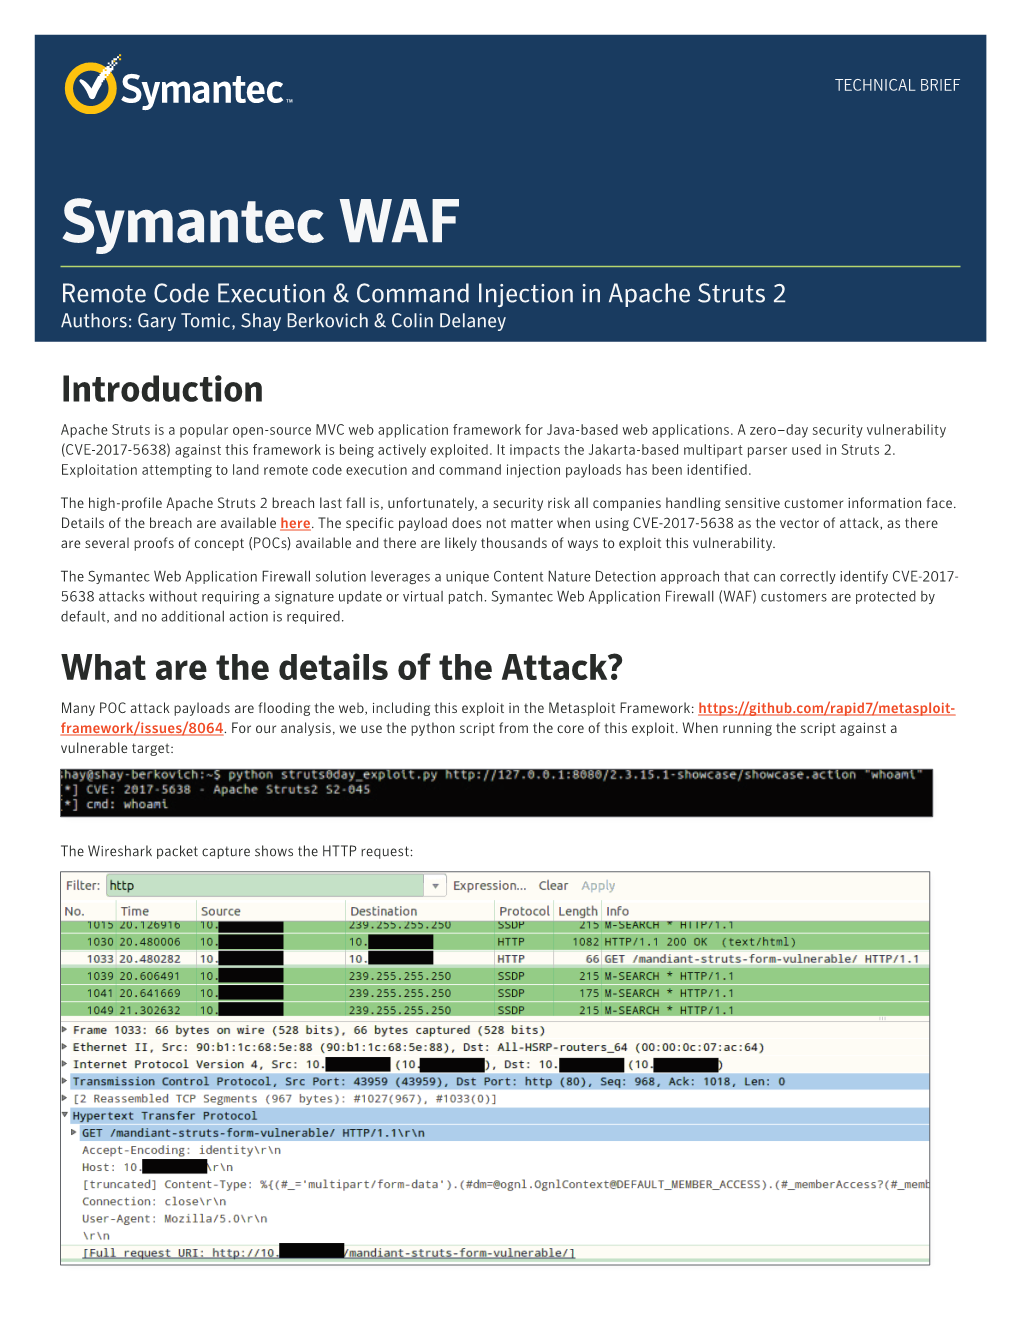 Symantec WAF Remote Code Execution & Command Injection in Apache Struts 2 Authors: Gary Tomic, Shay Berkovich & Colin Delaney